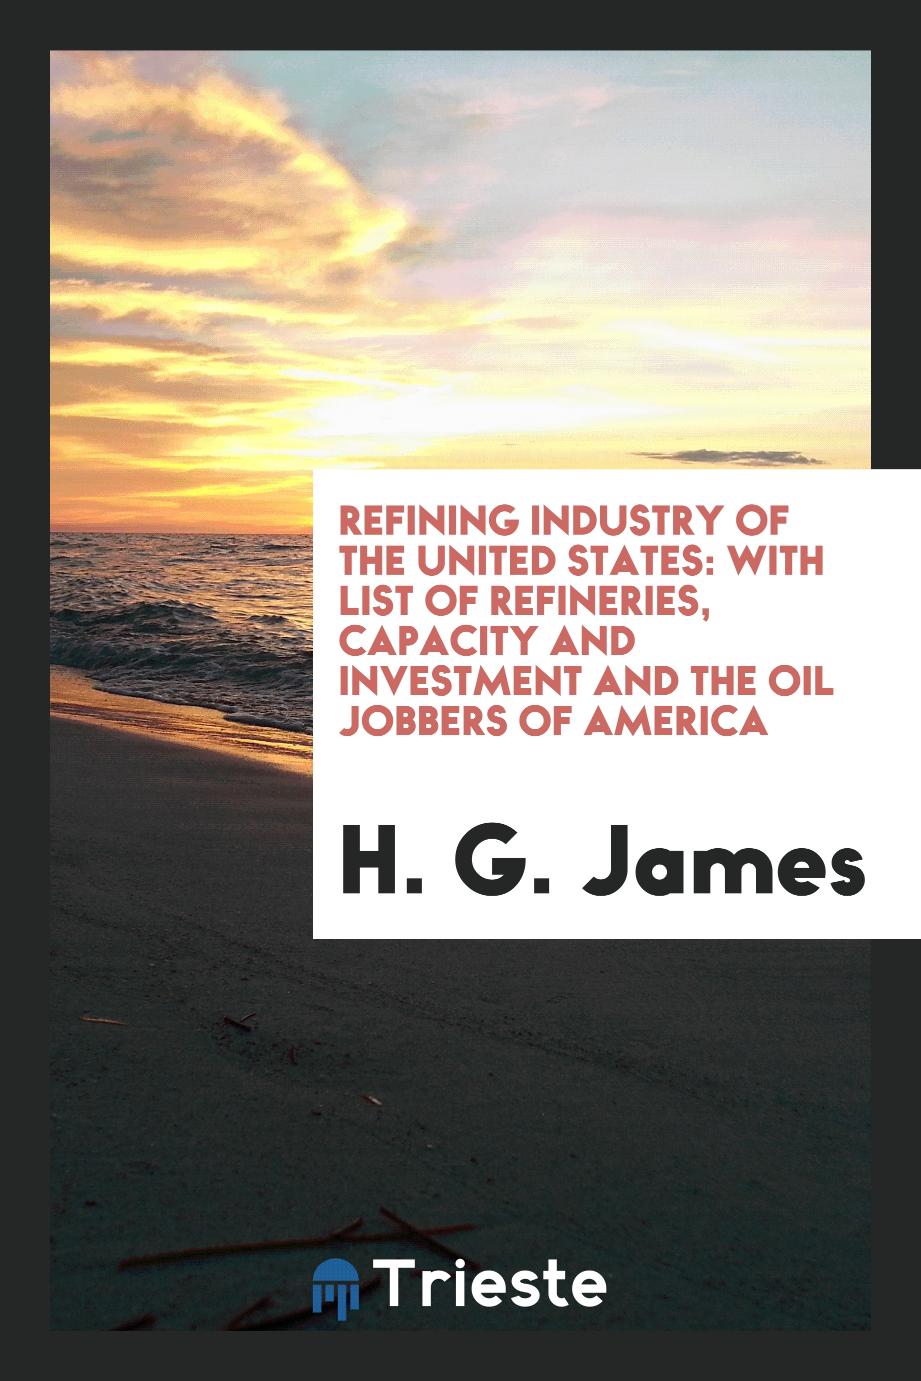 Refining industry of the United States: with list of refineries, capacity and investment and the oil jobbers of America